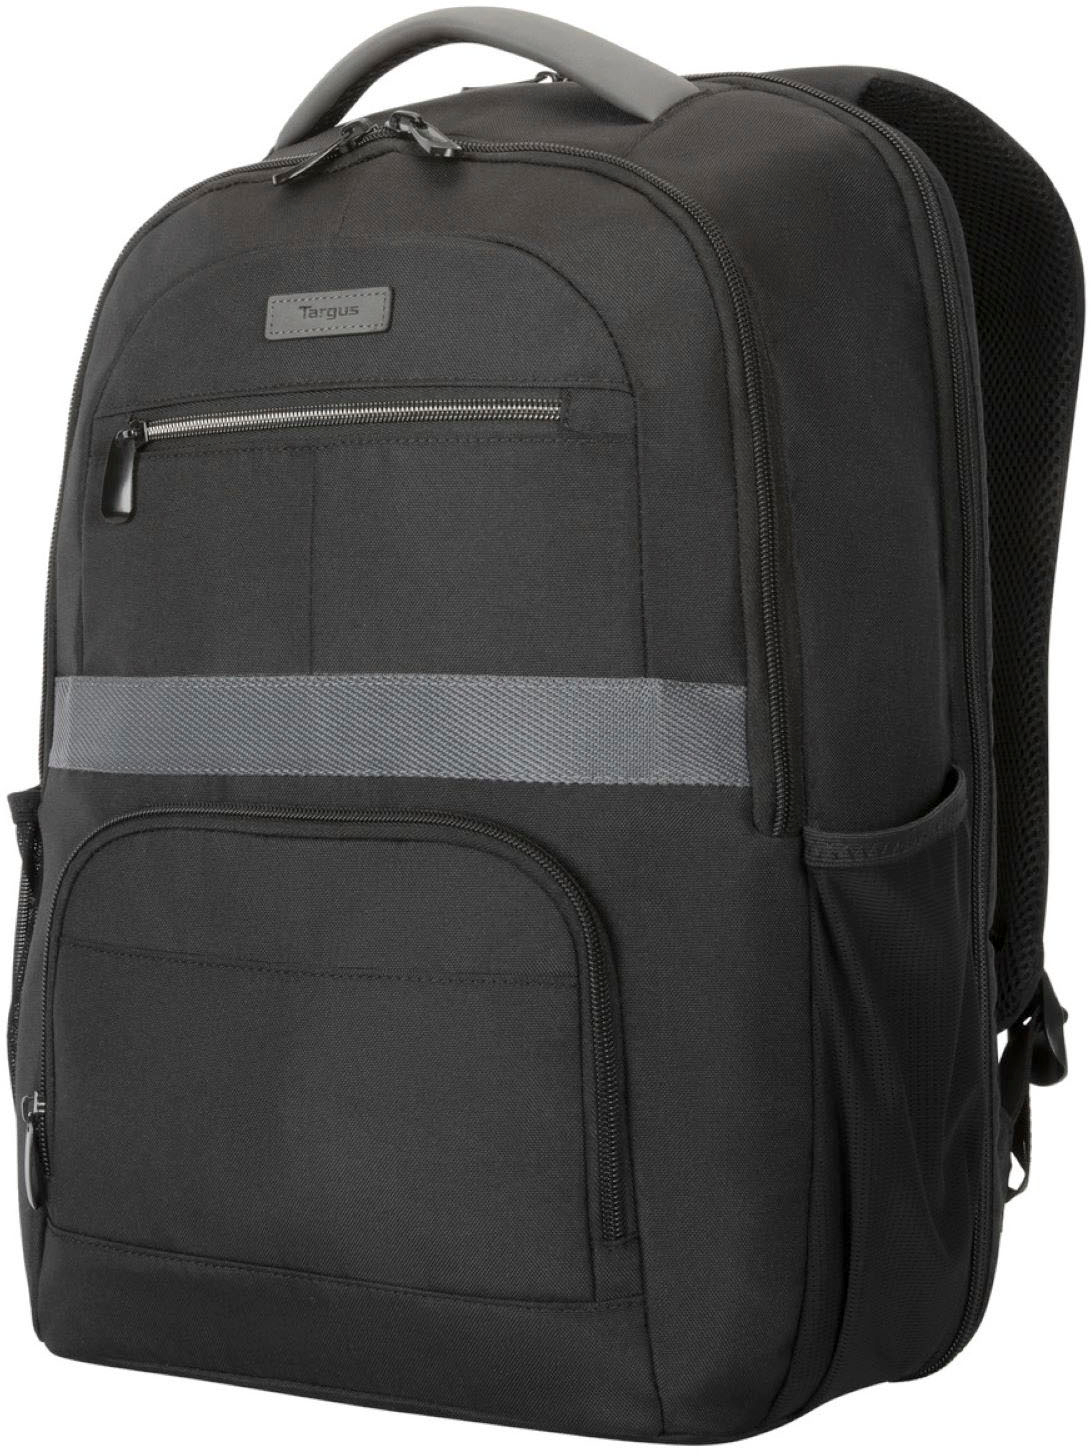 Angle View: Targus - 15–16” Exhibition Backpack - Black